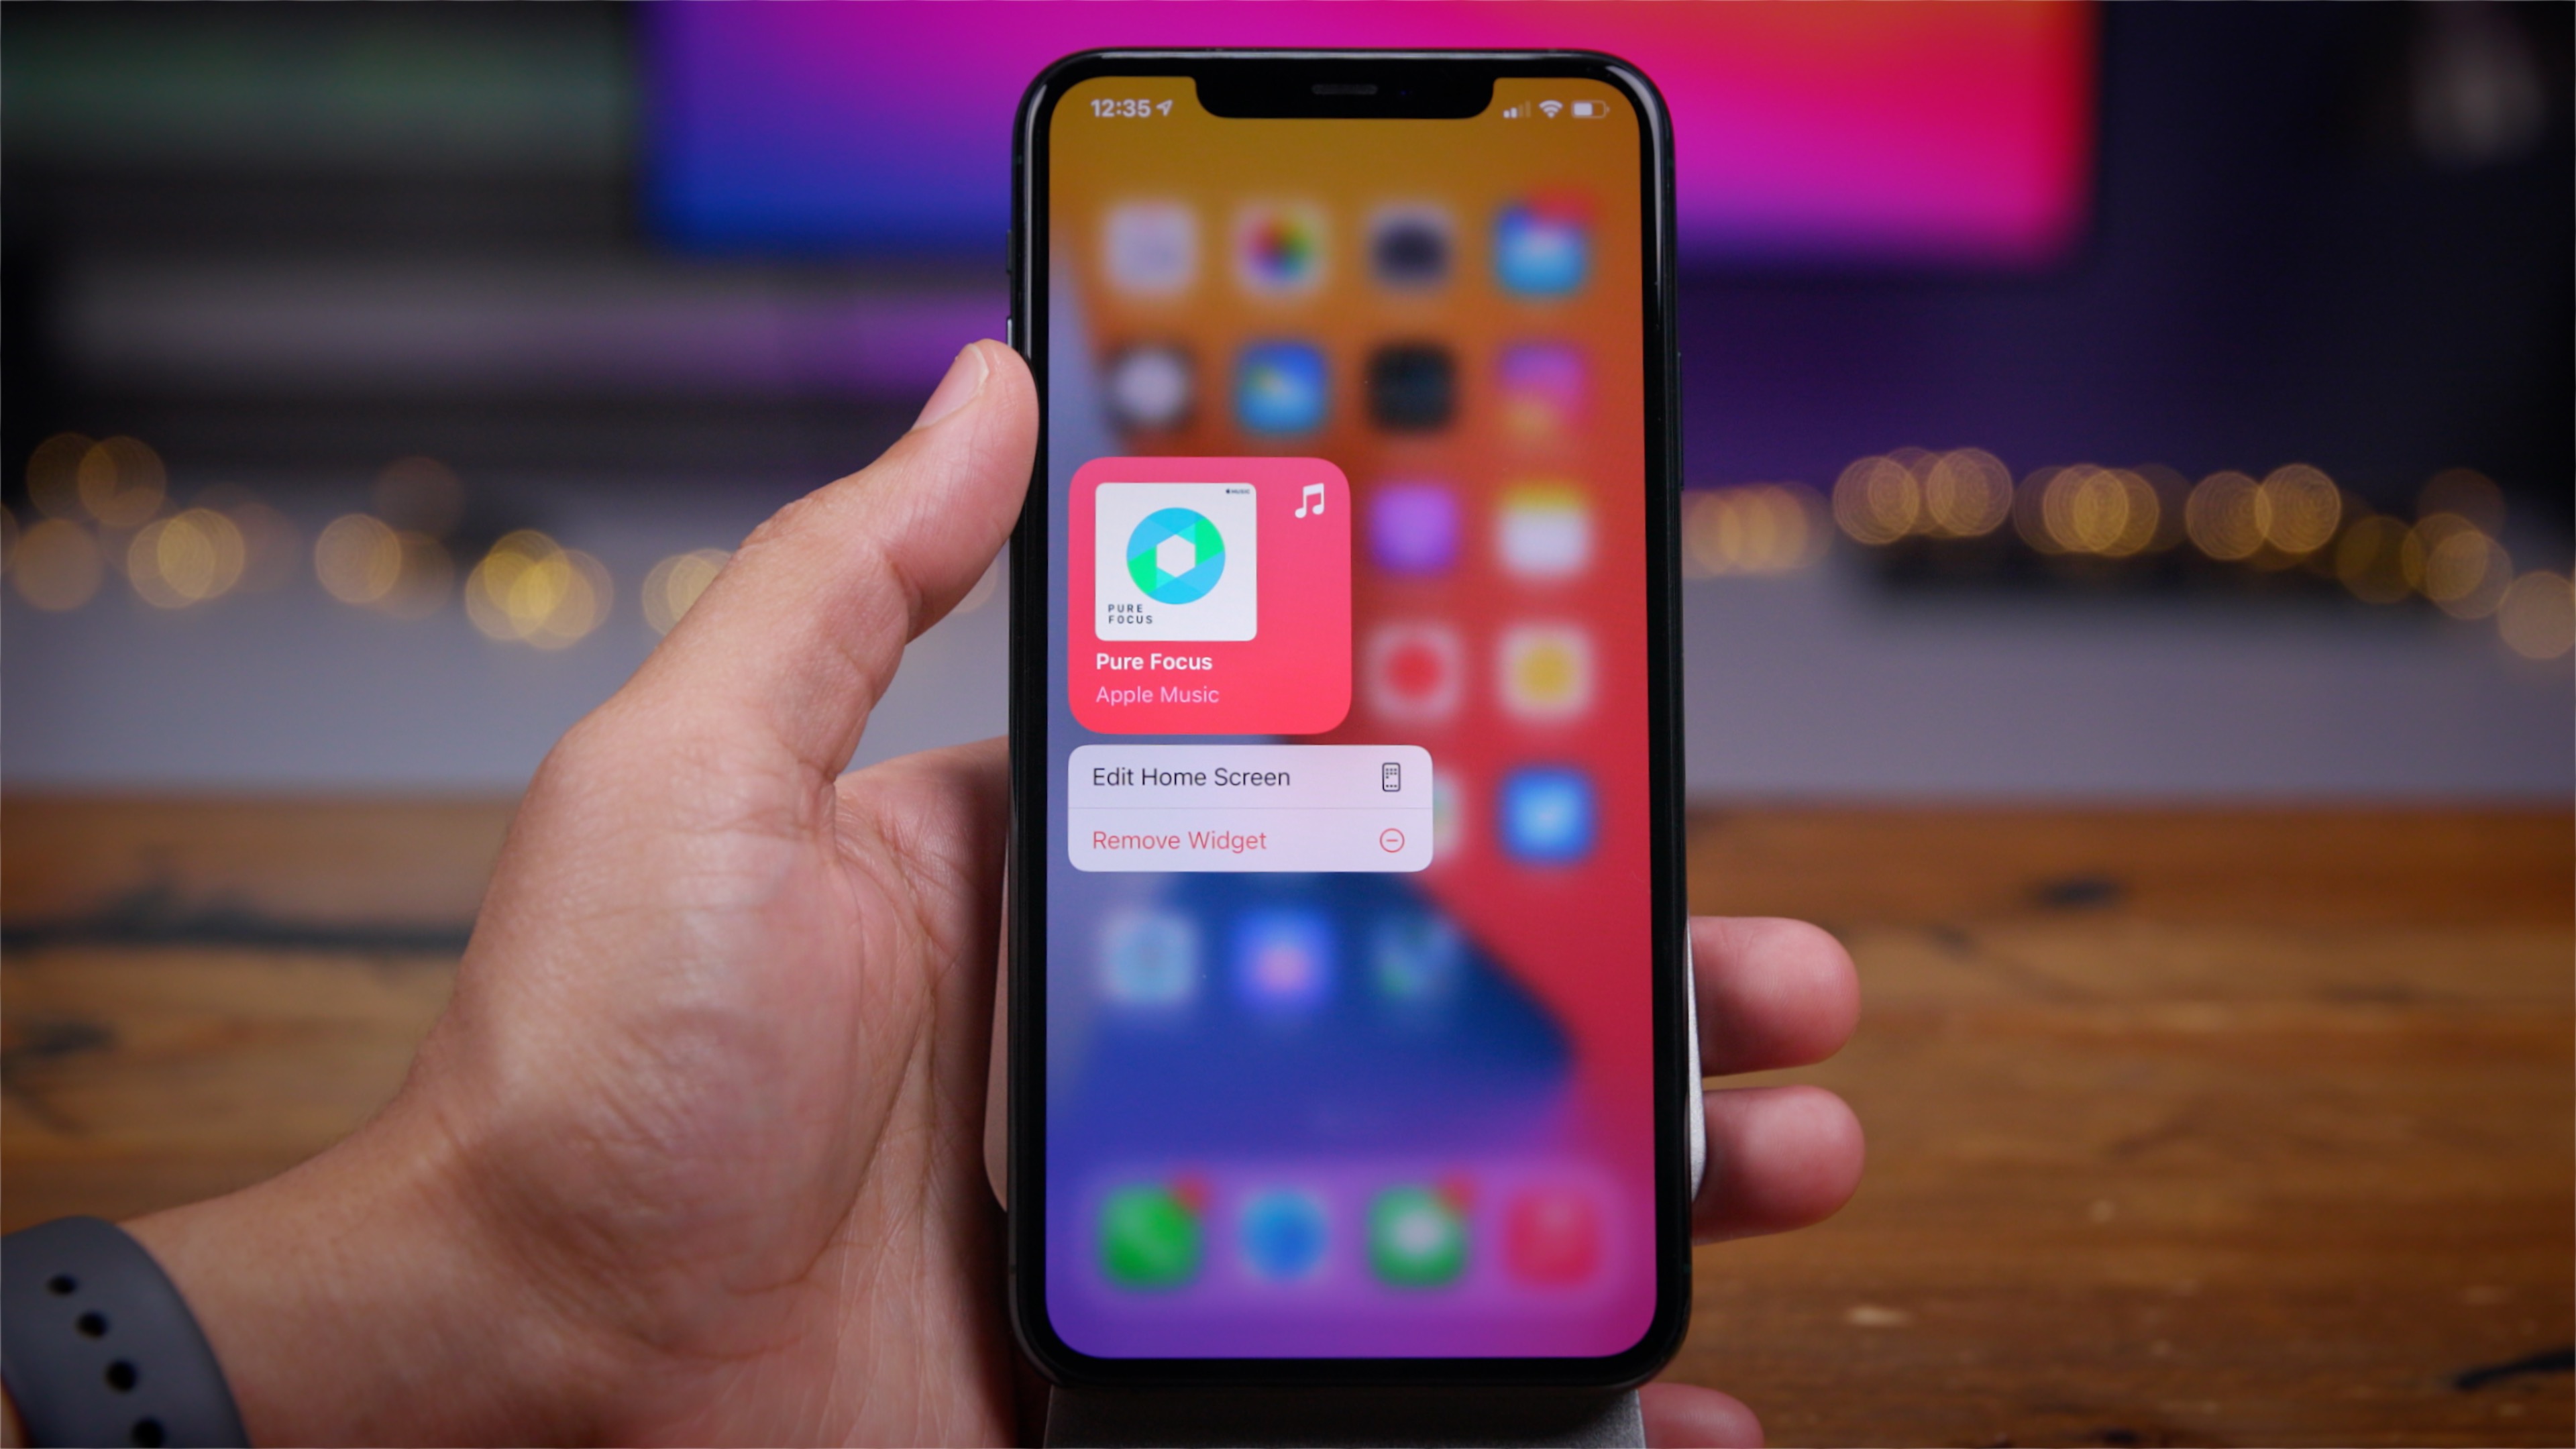 Hands-on: The 10 best iOS 14 features [Video] - 9to5Mac